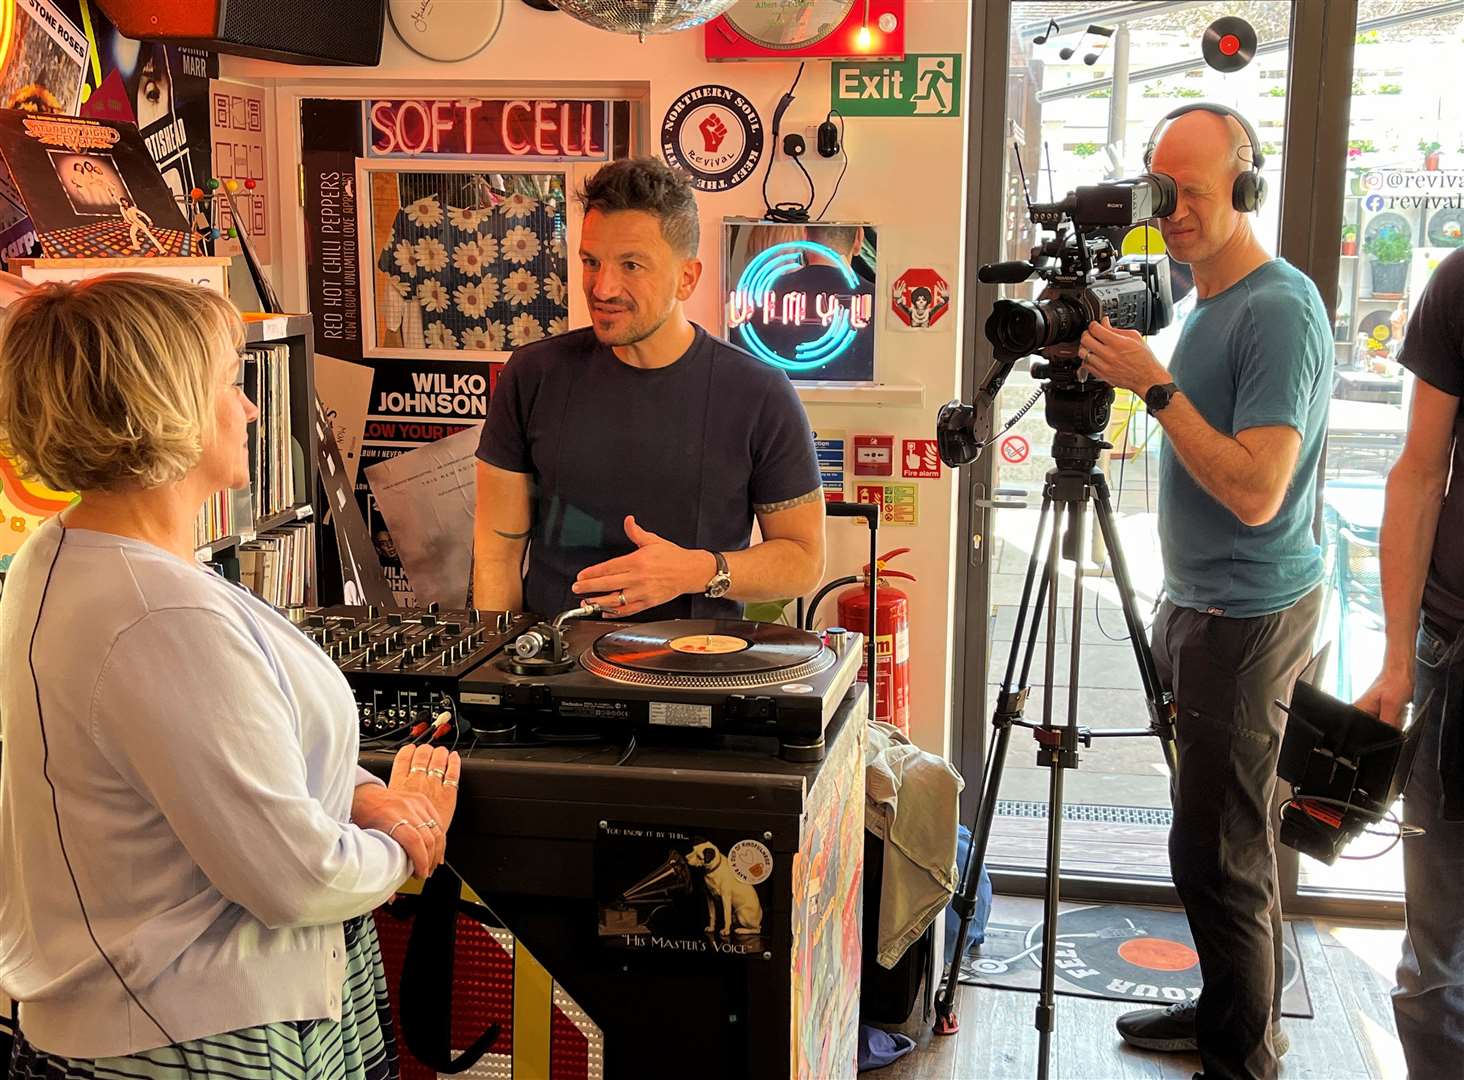 Peter Andre visited Revival Food and Mood in Whitstable for The One Show on BBC. Picture: Revival Food & Mood